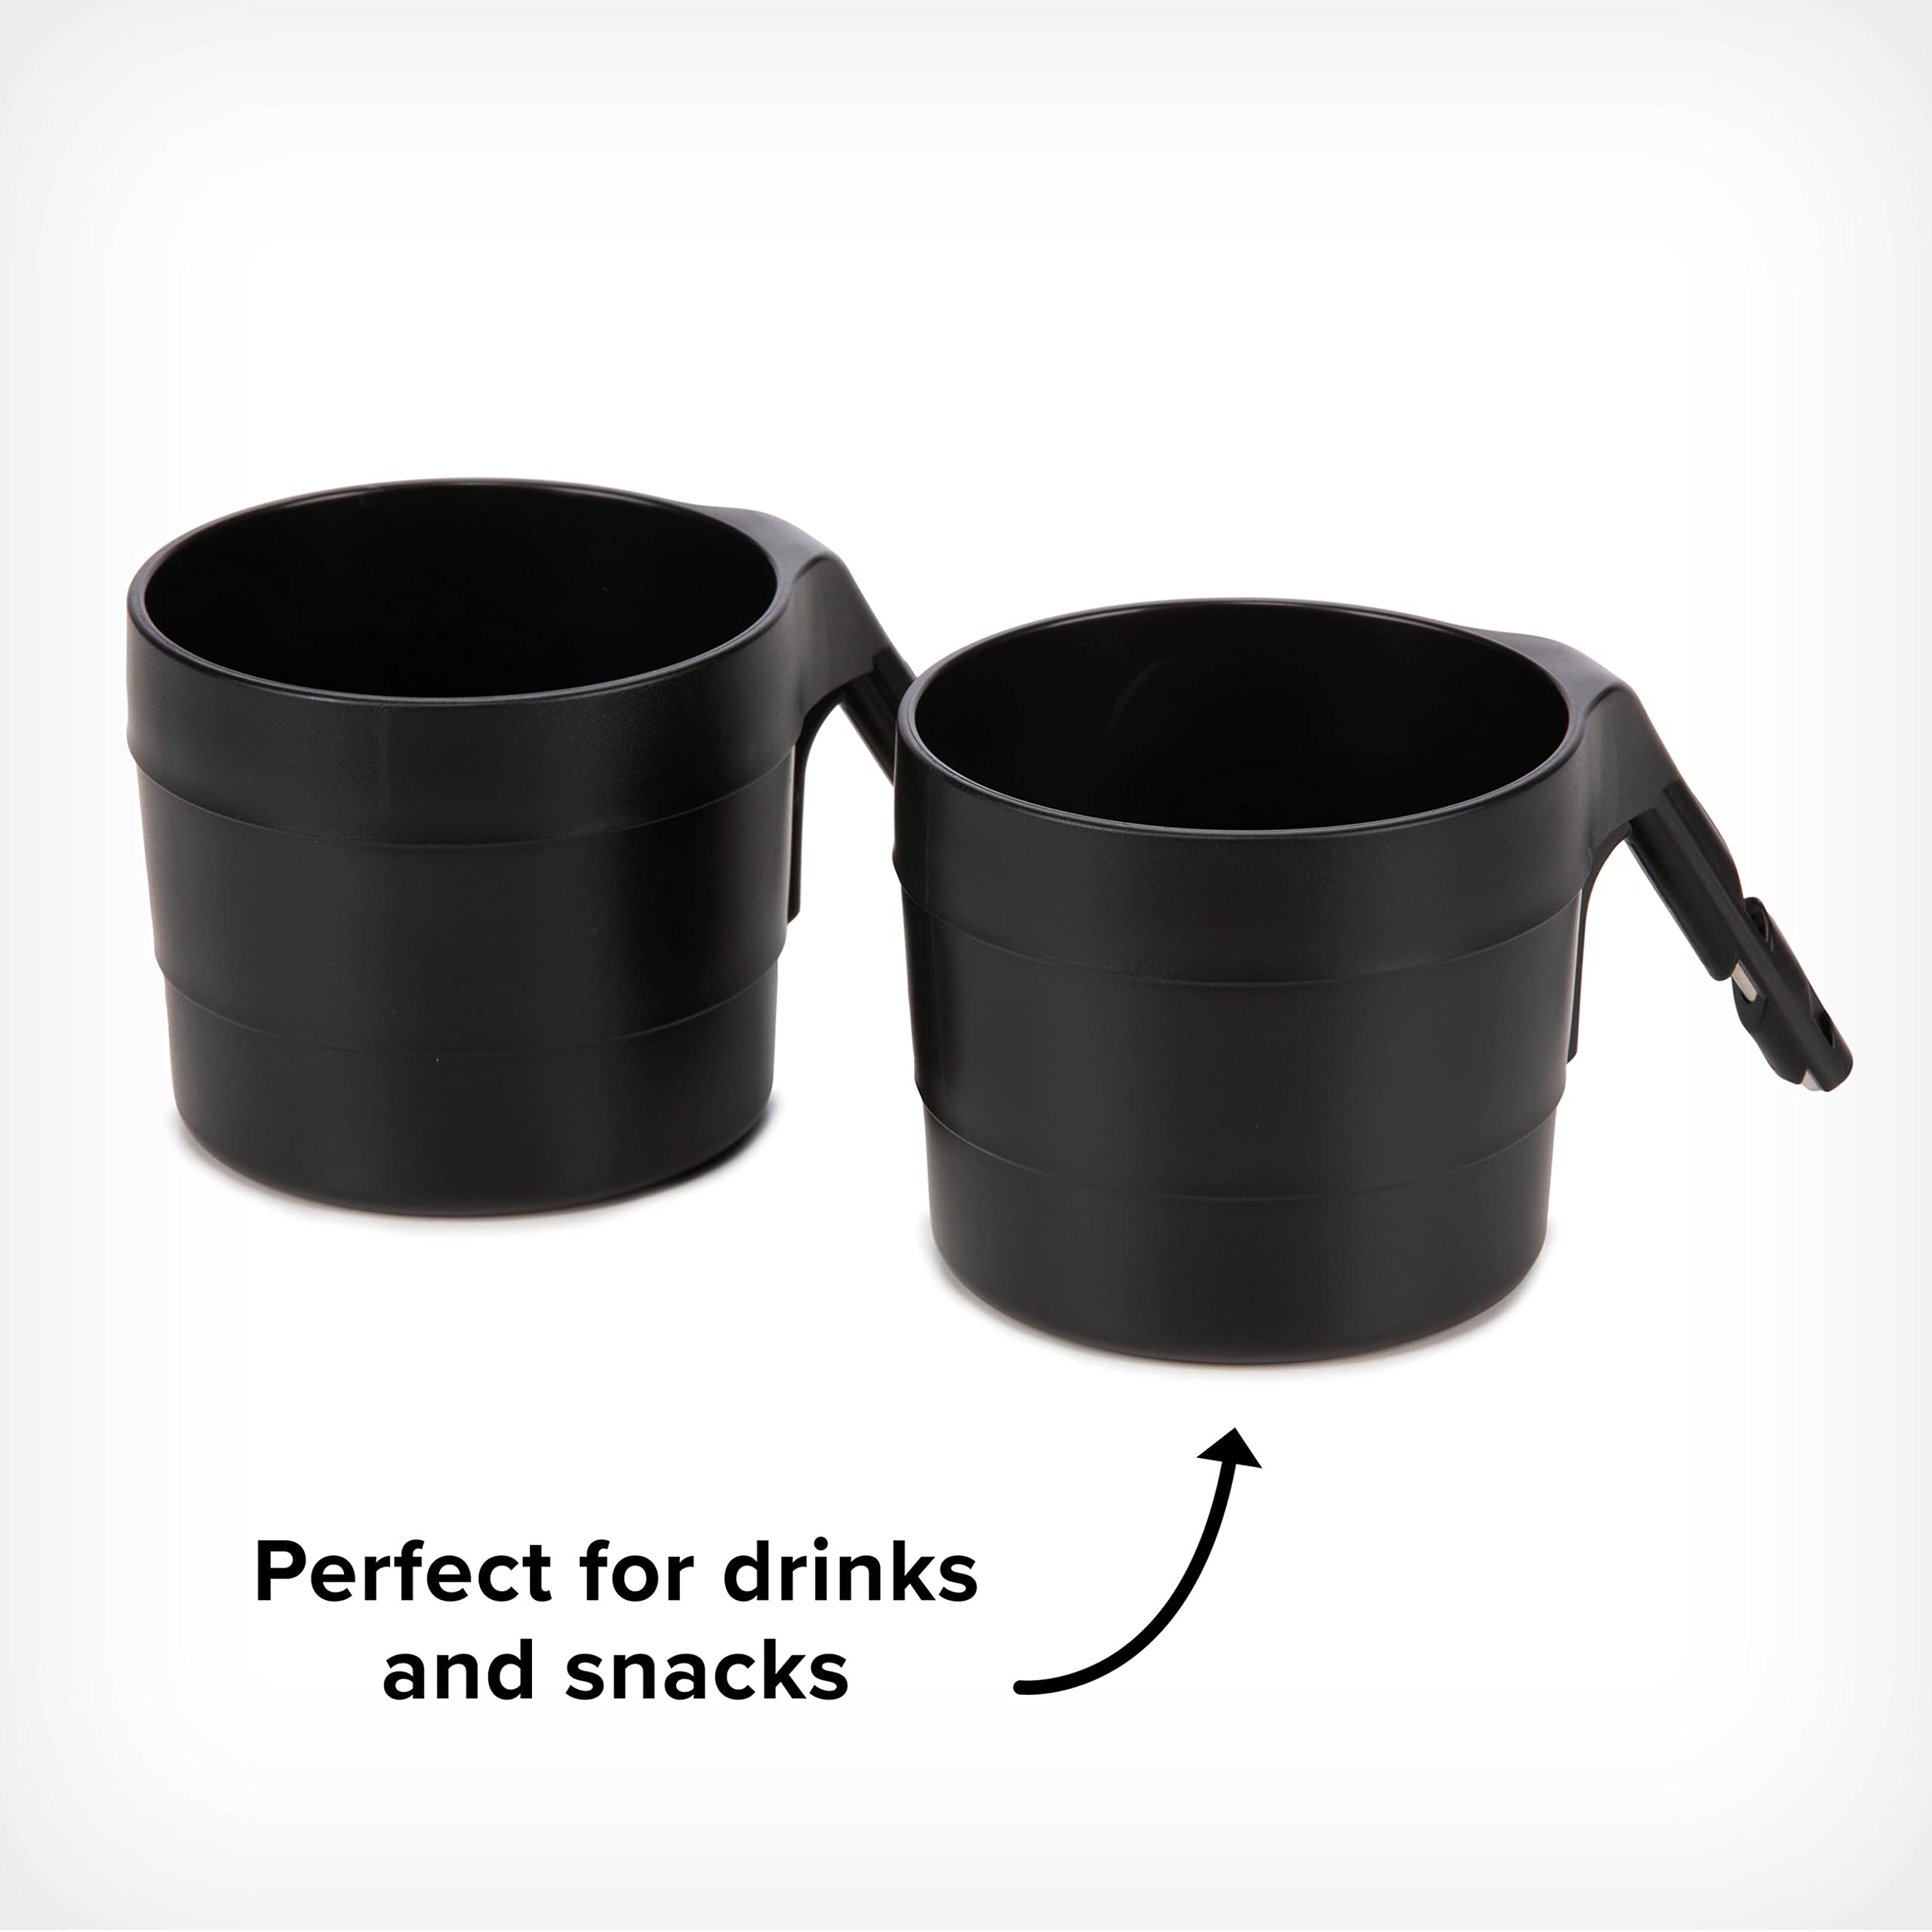 Diono XL Car Seat Cup Holders for Radian and Everett Car Seats, Pack of 2 Cup Holders, Black